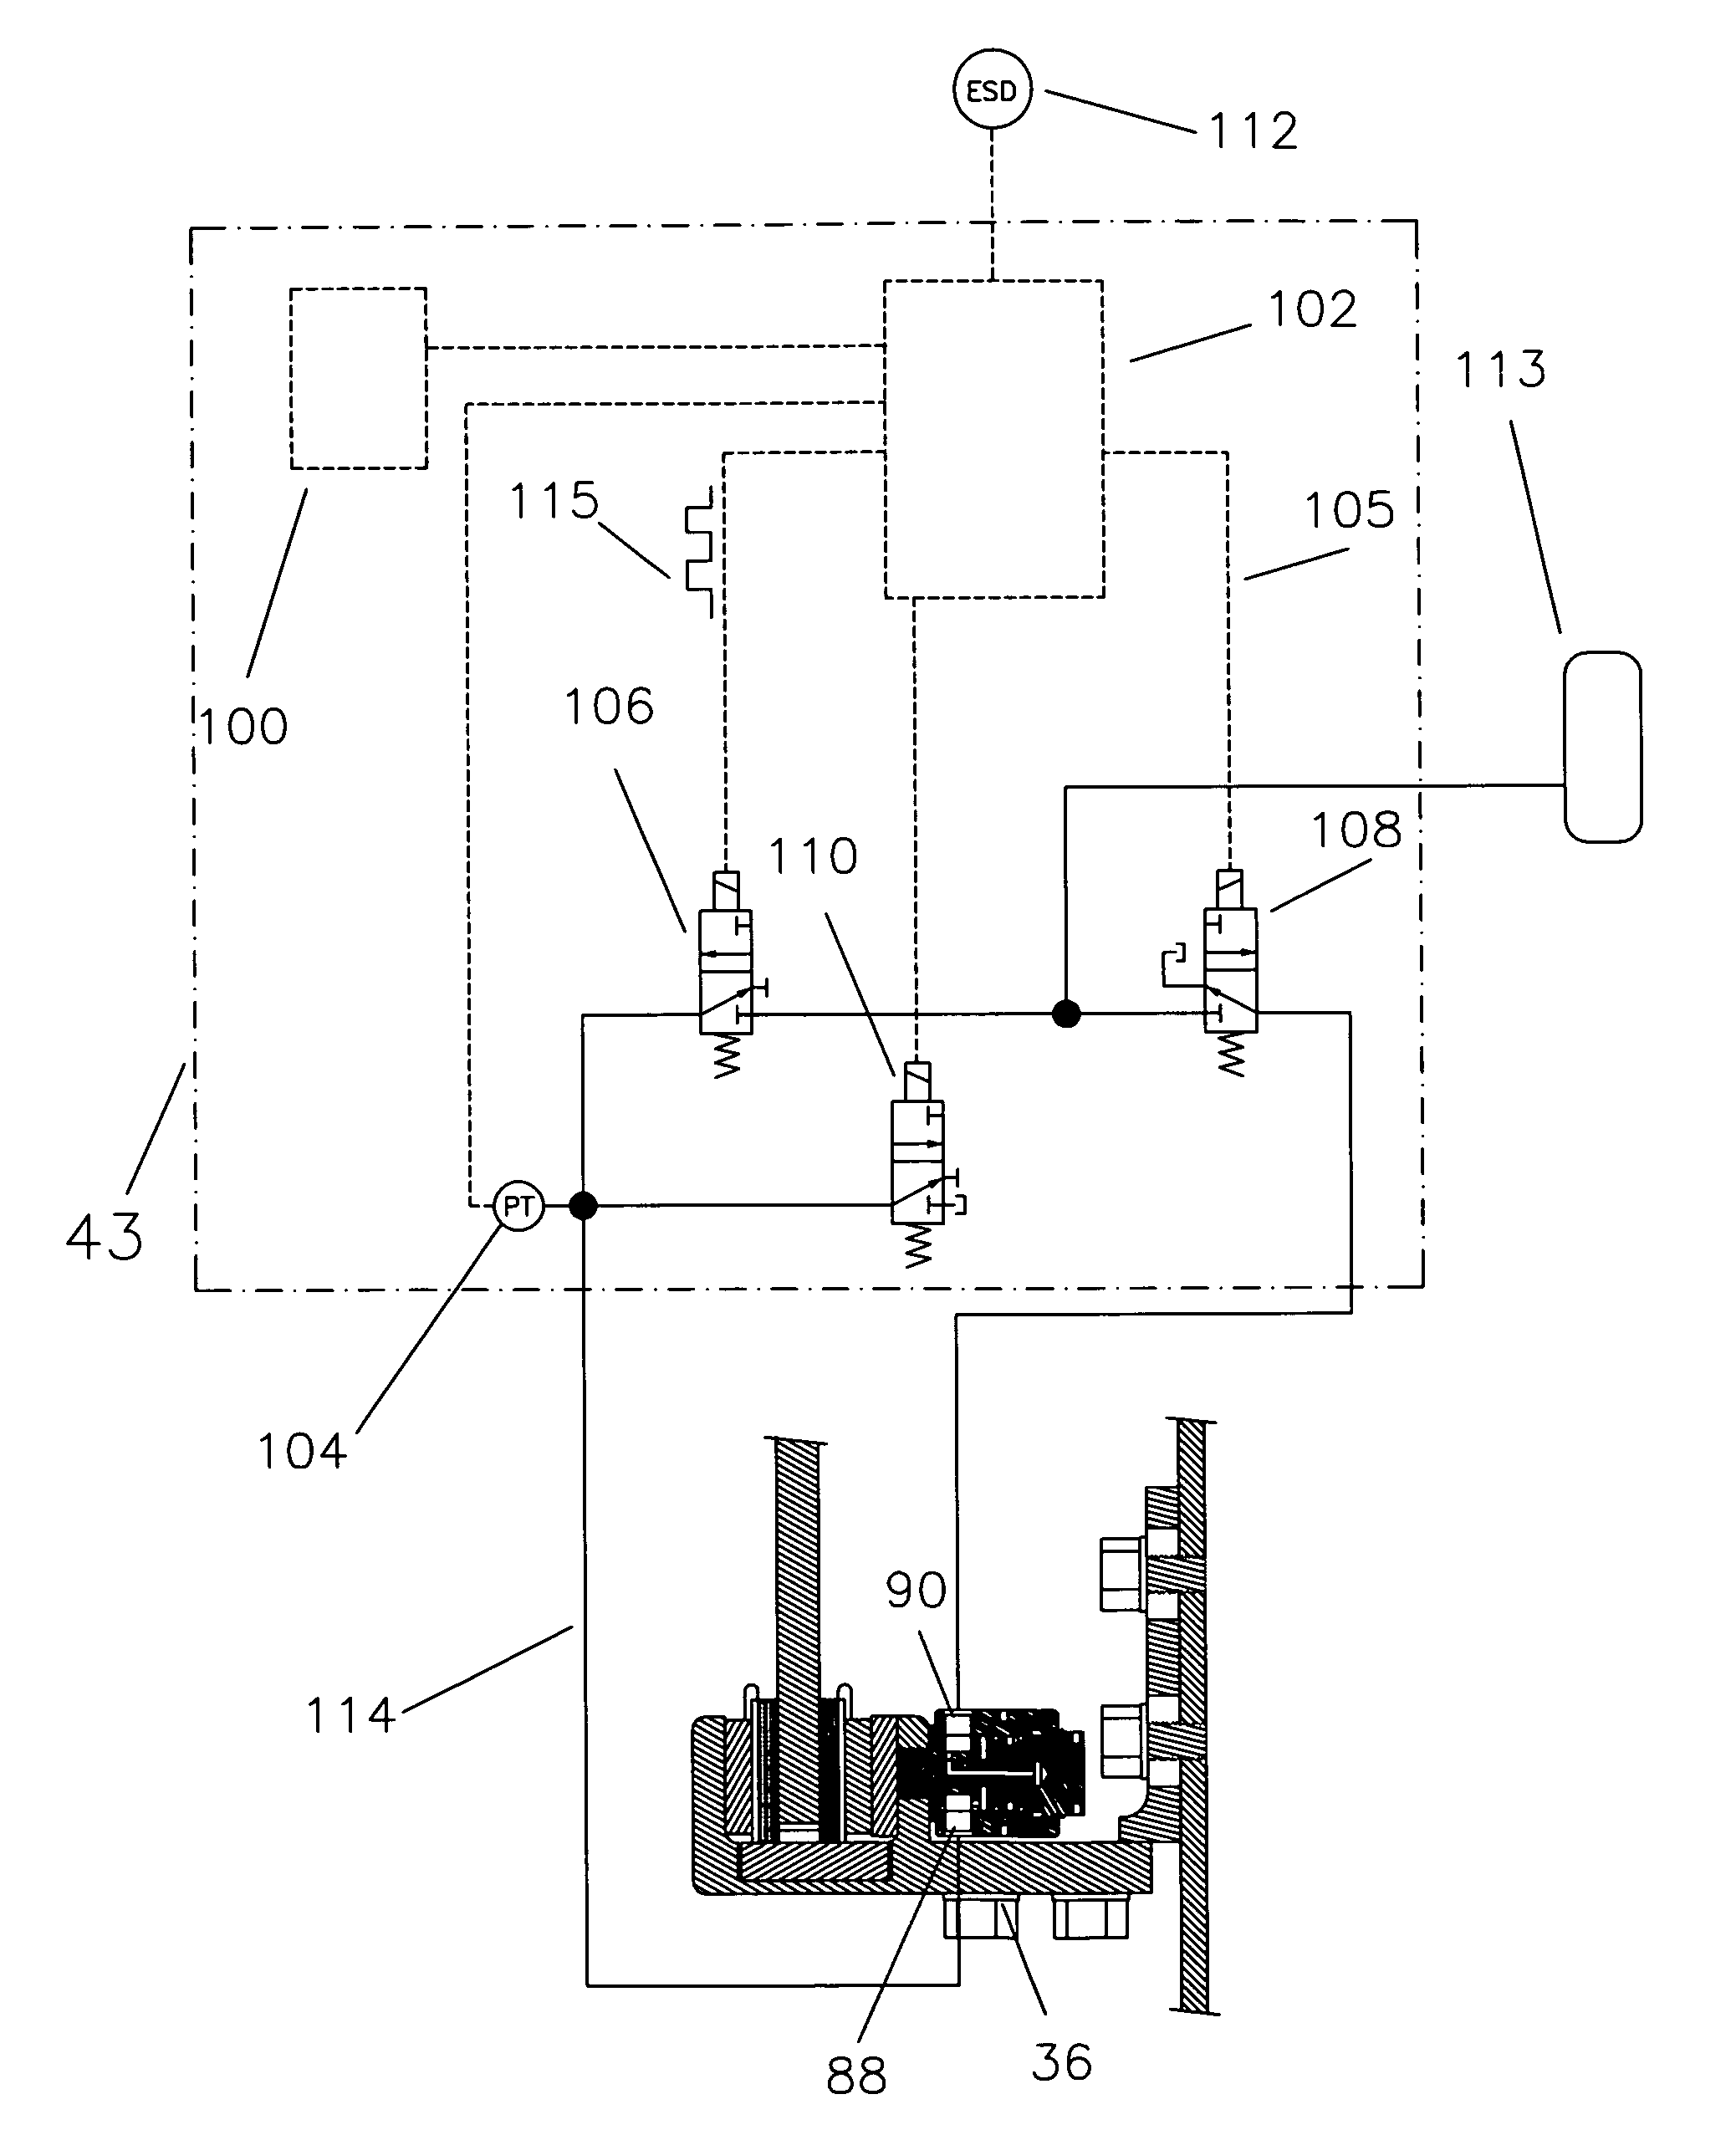 Method for automatic slip clutch tension on a reel